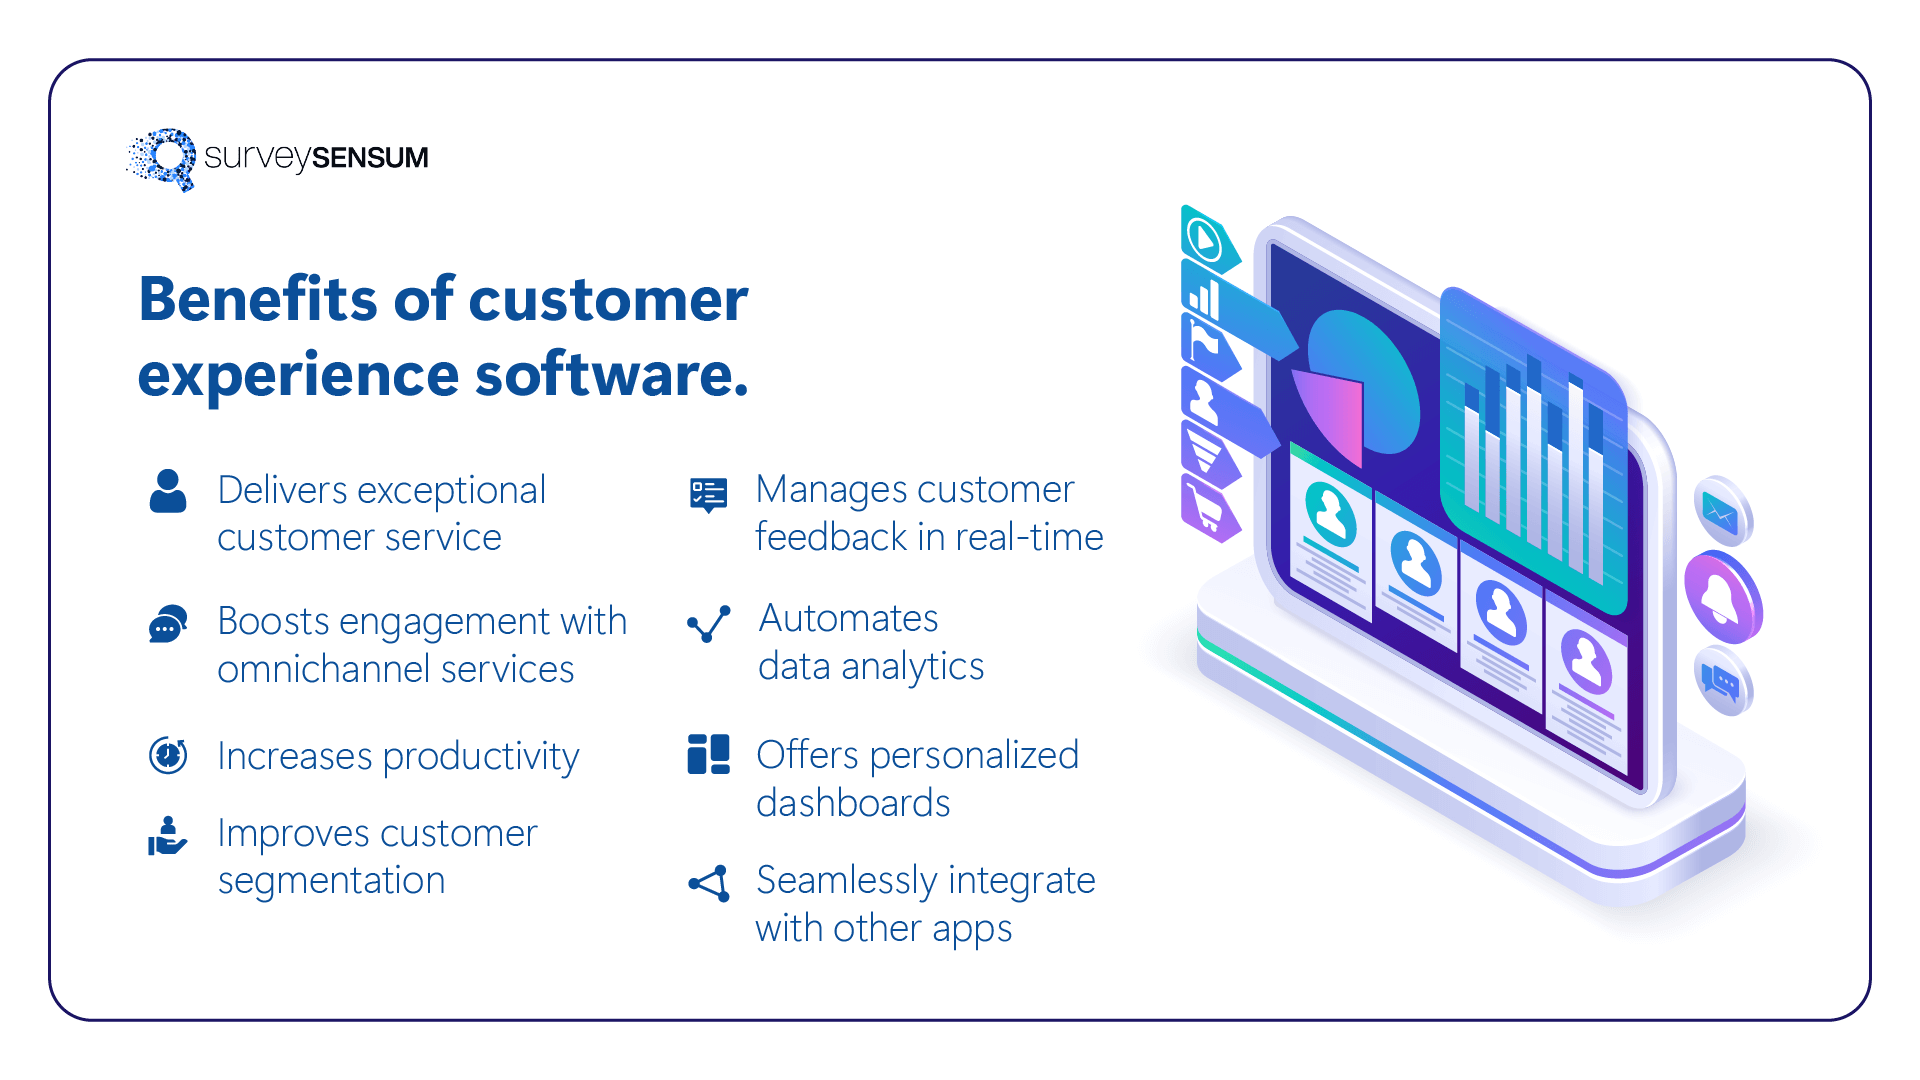 Benefits of Customer Experience Software